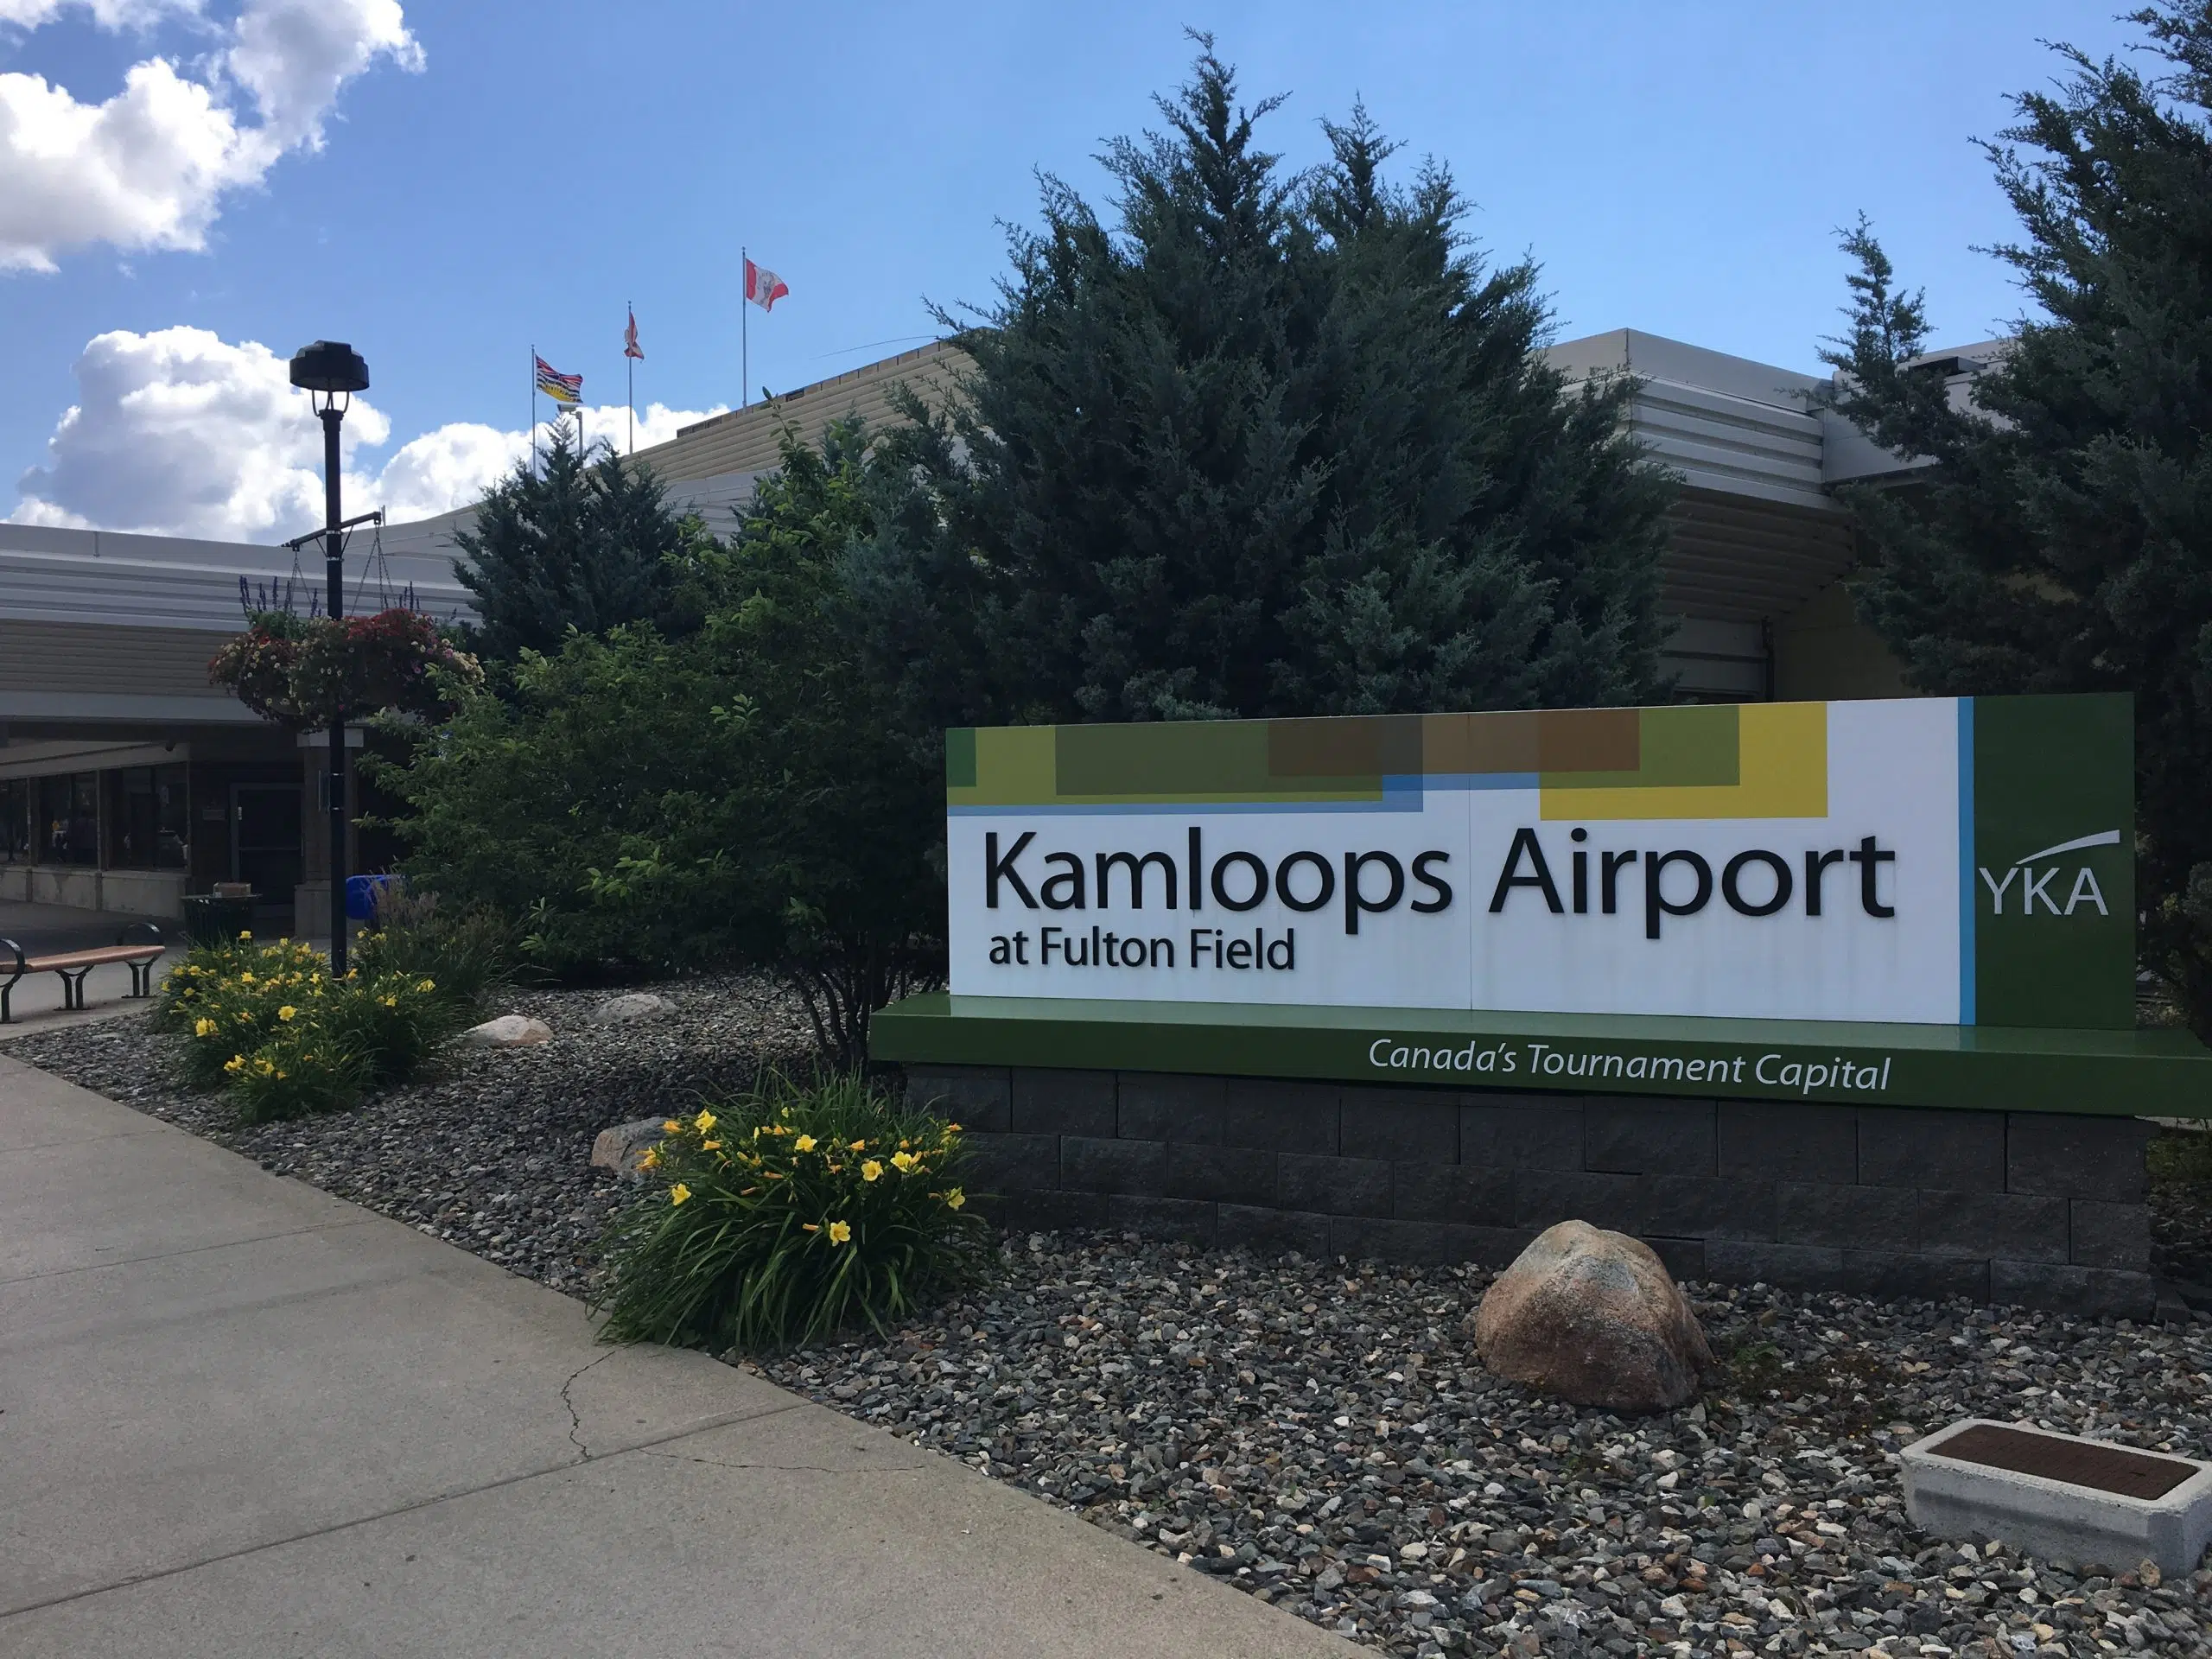 Air Canada restoring daily flights to Vancouver and Calgary from Kamloops on June 1